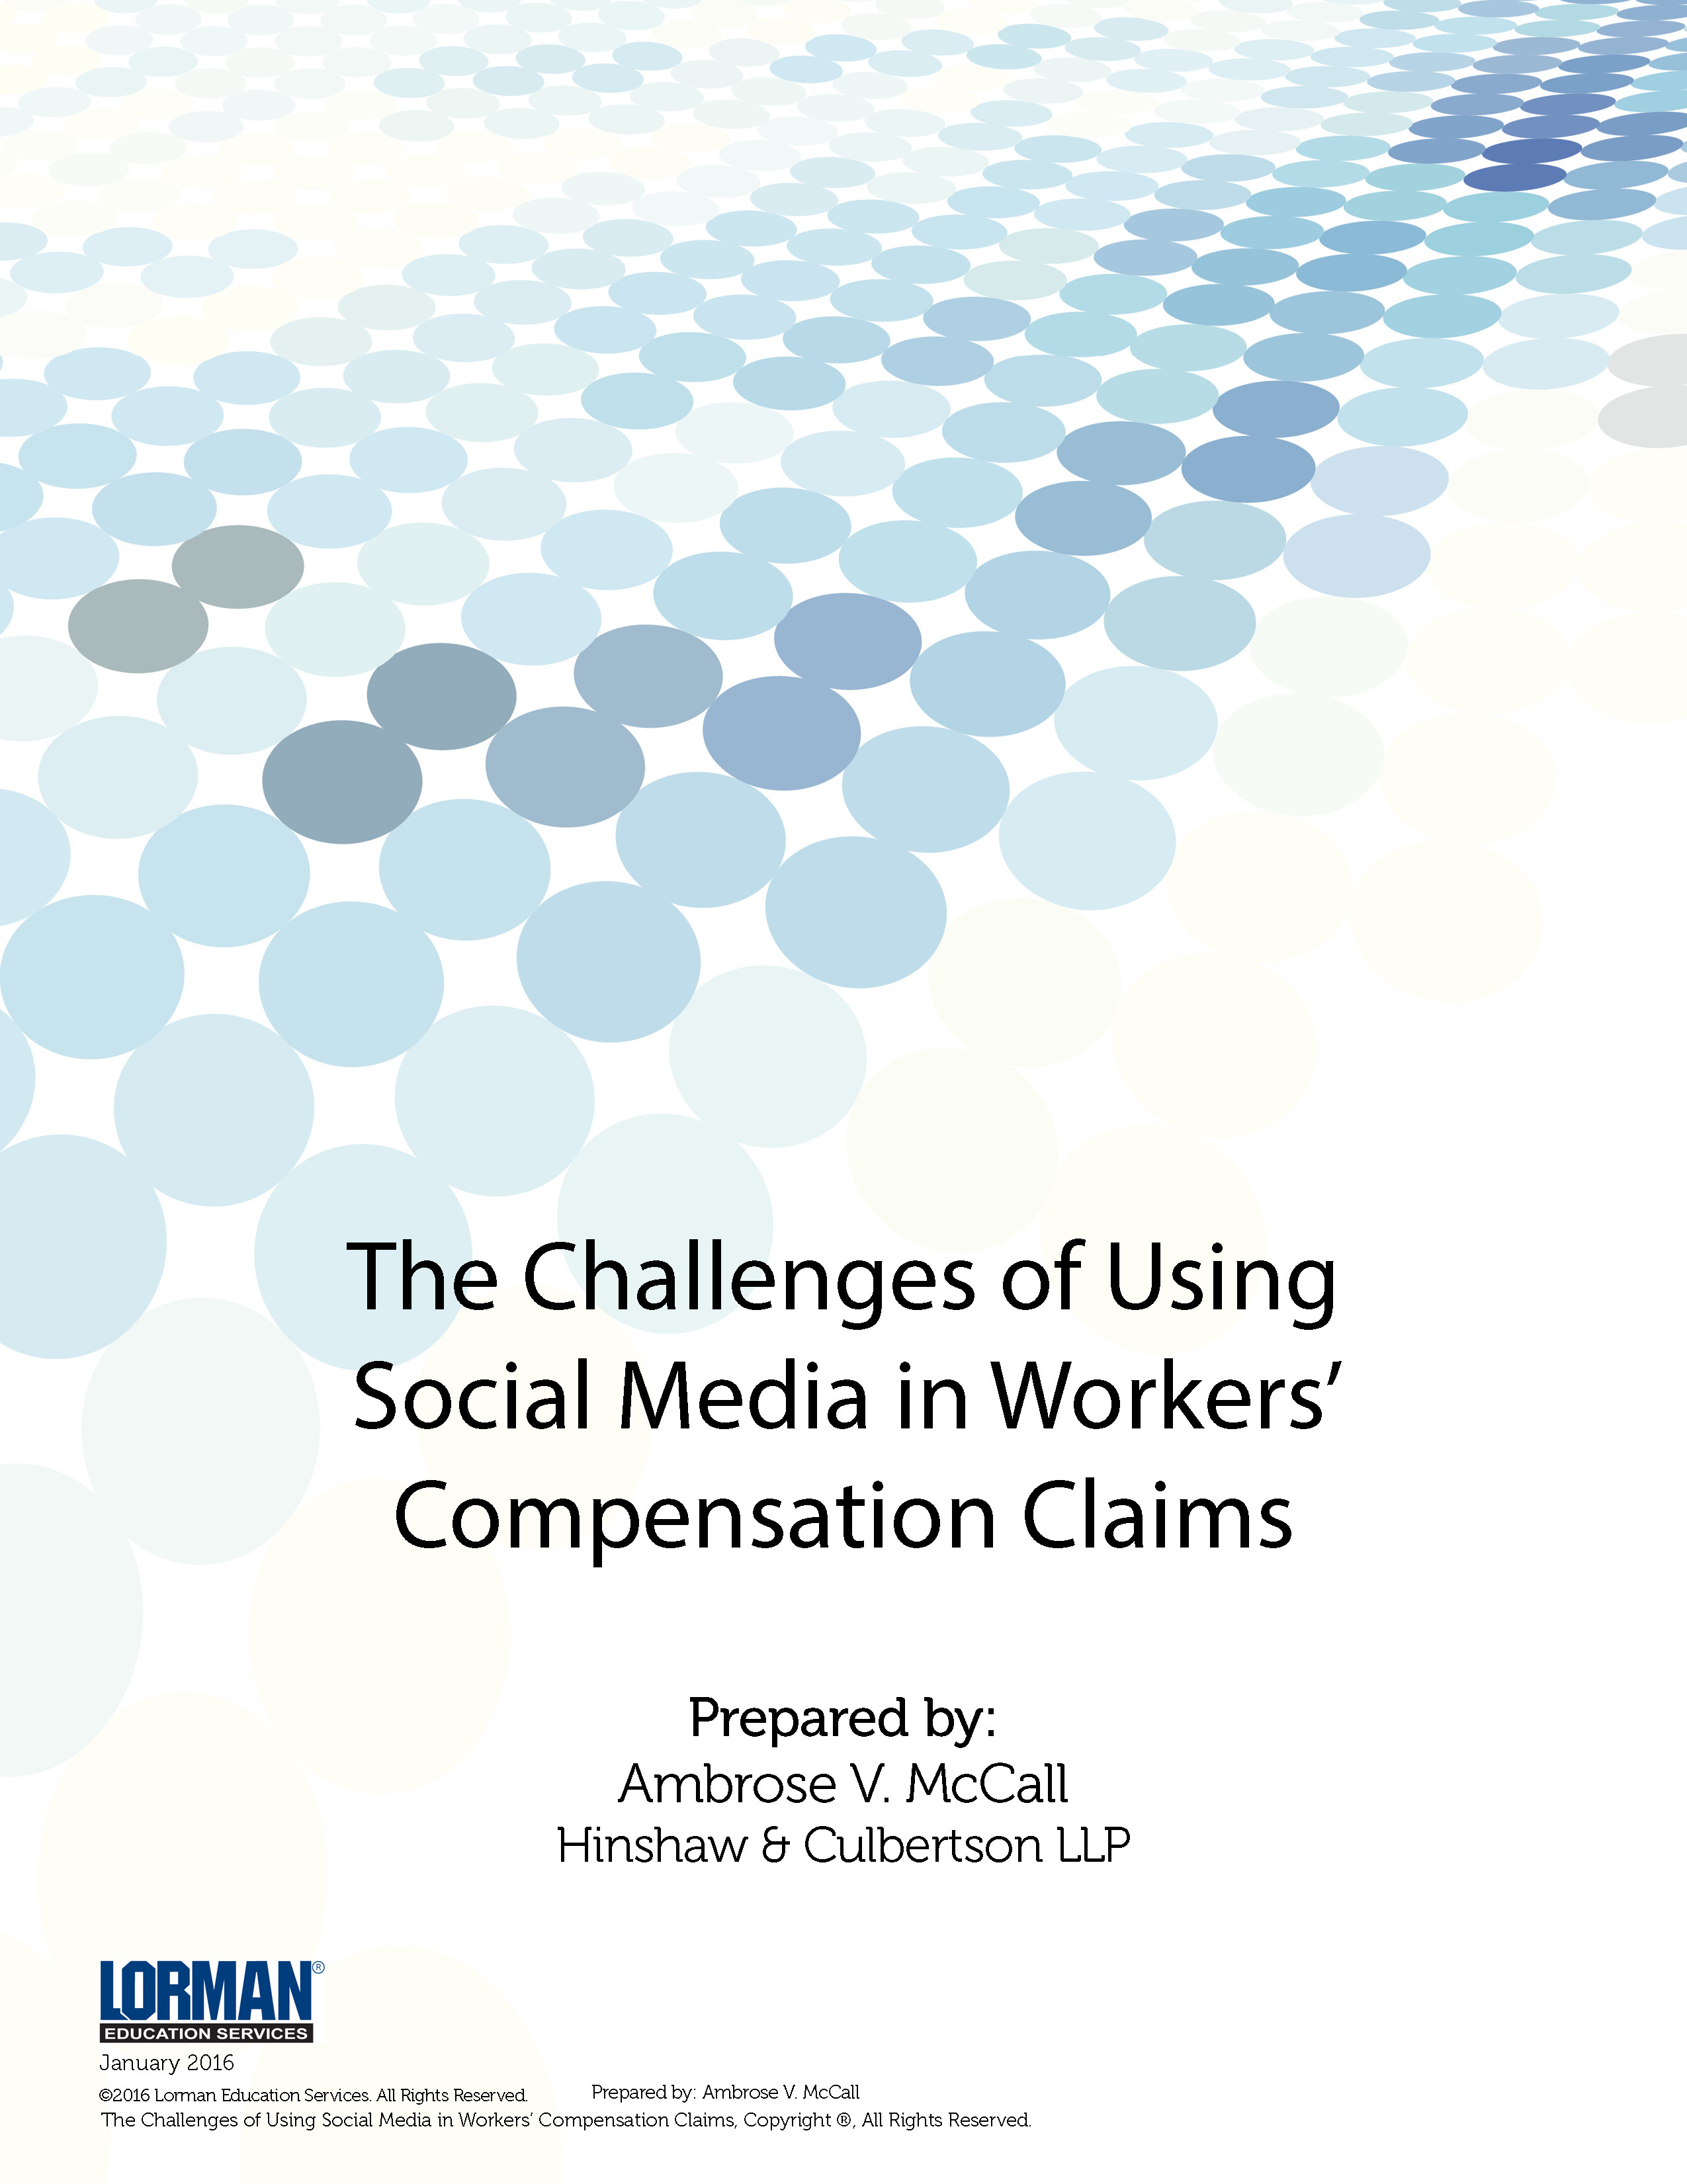 The Challenges of Using Social Media in Workers’ Compensation Claims